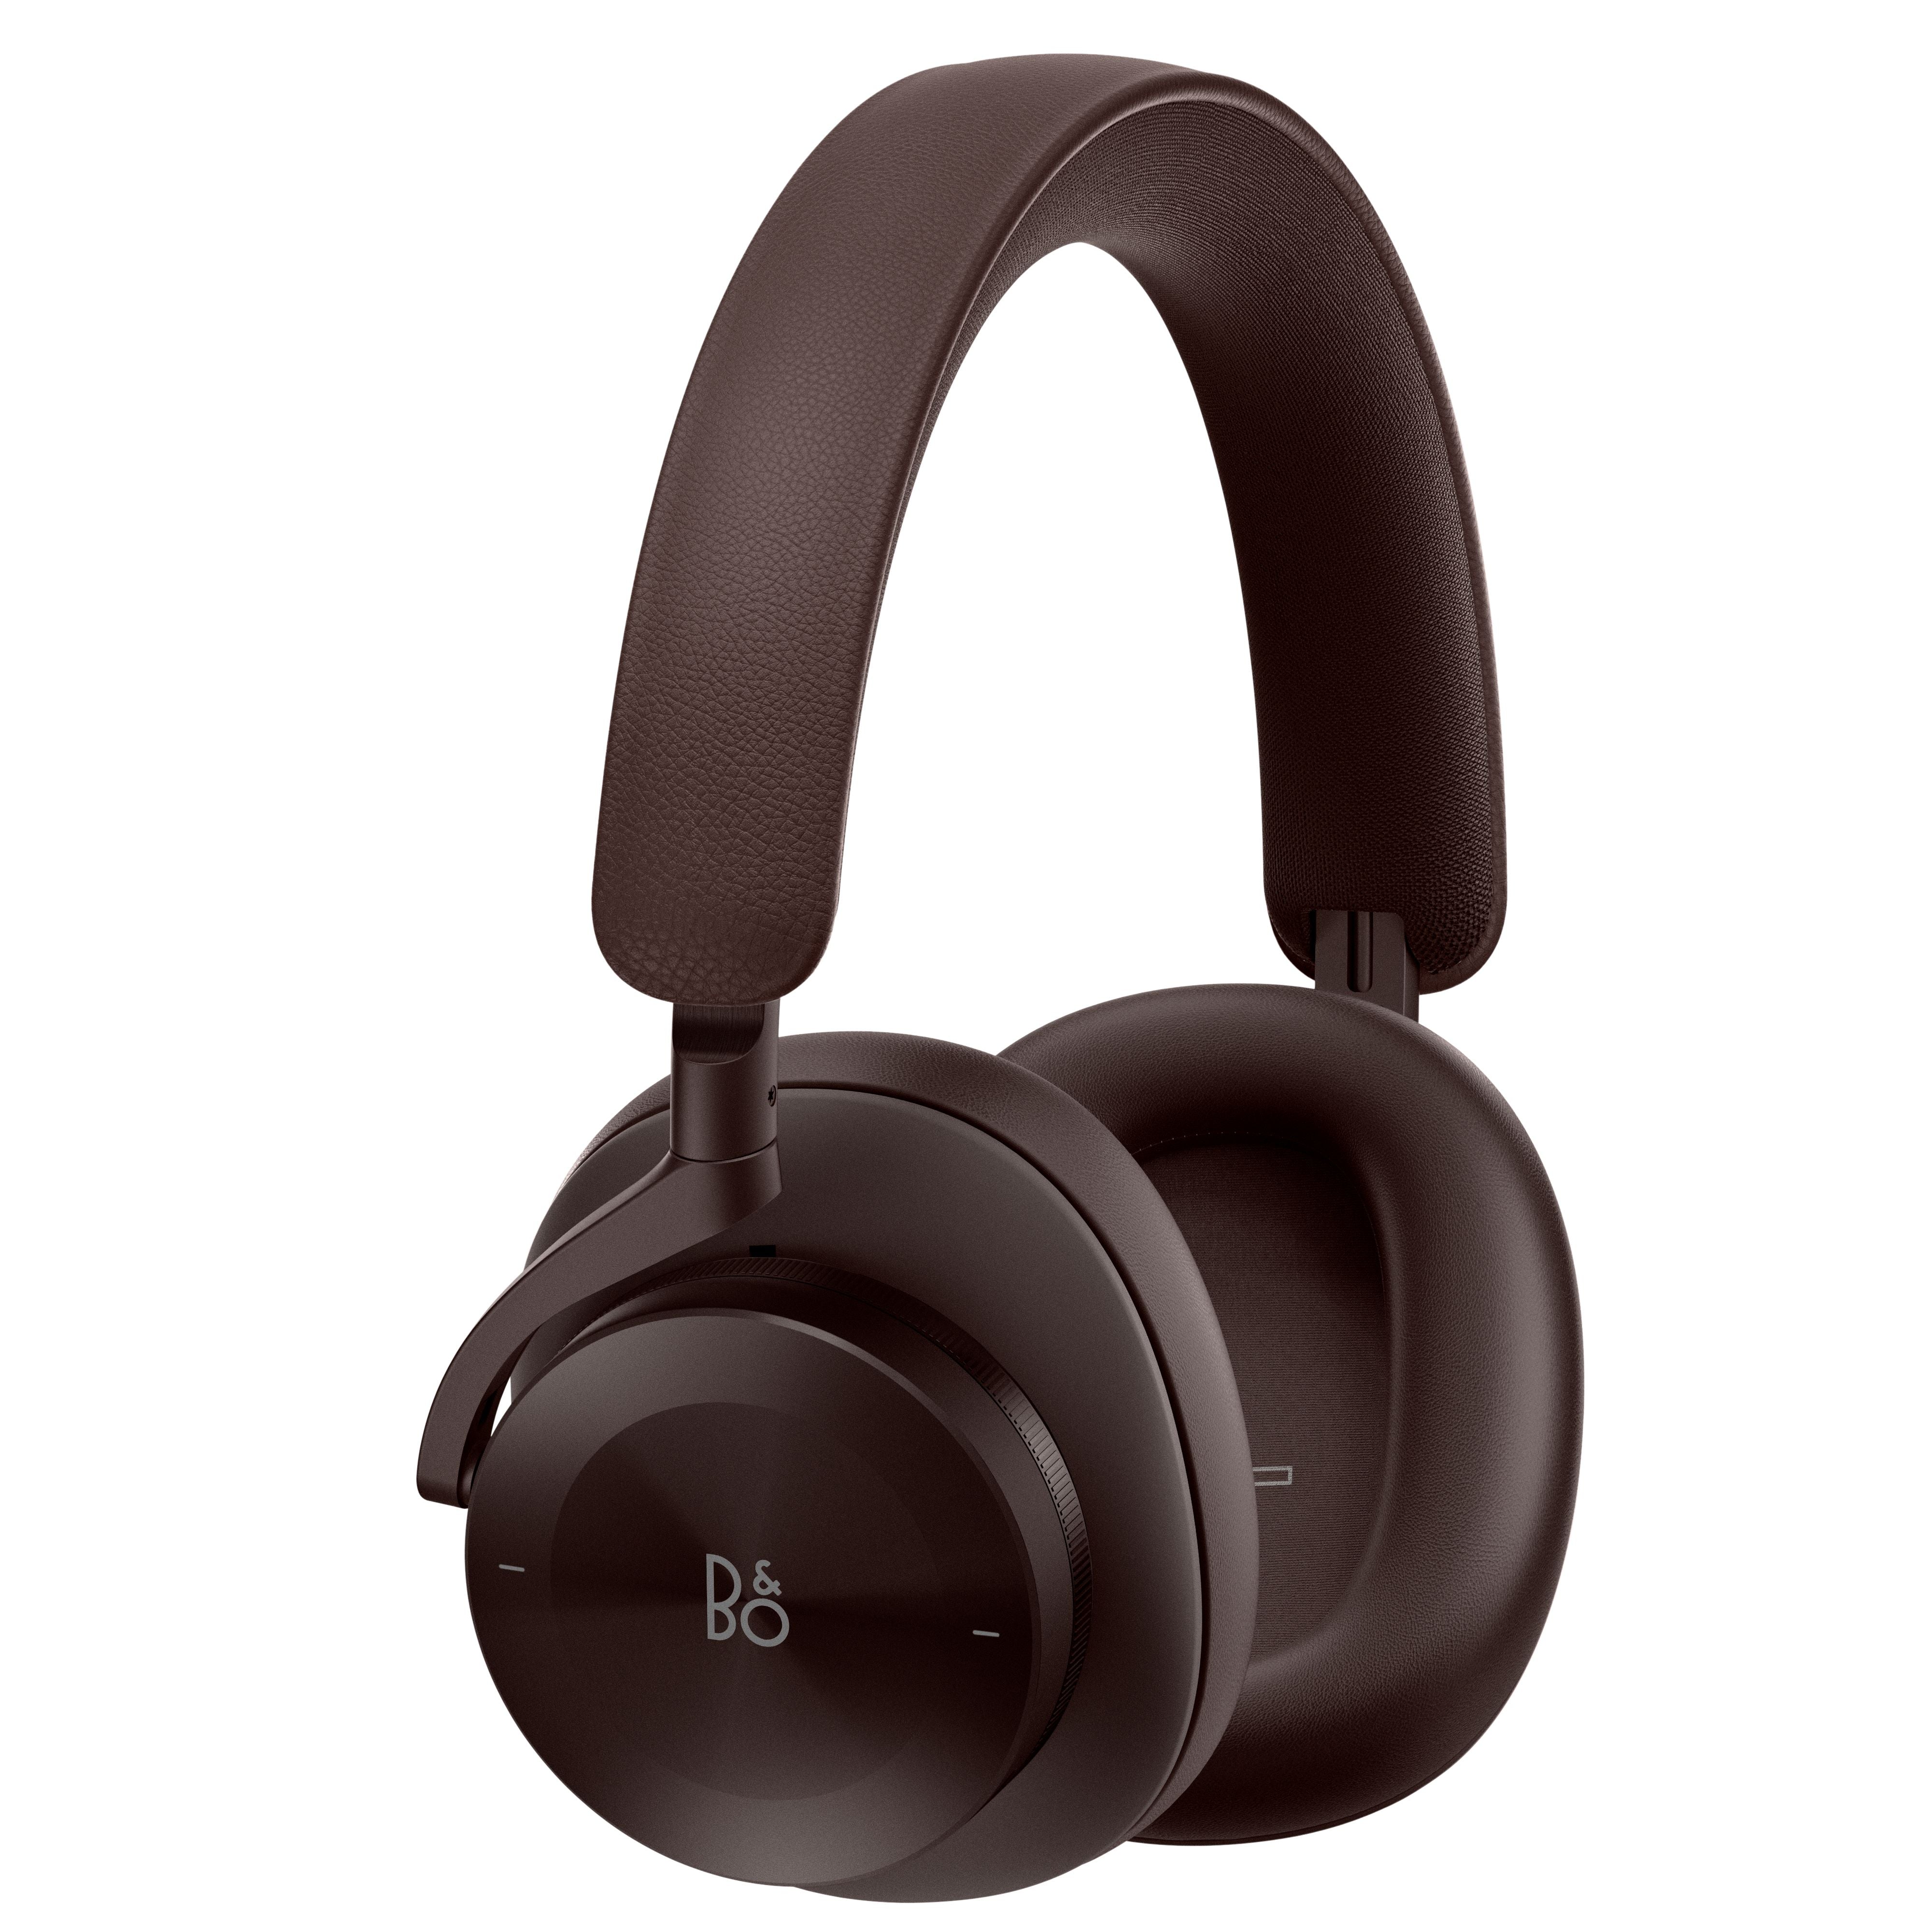 B&O Beoplay H95 - Bang & Olufsen Premium Wireless Noise Cancelling Over-Ear Headphones ANC